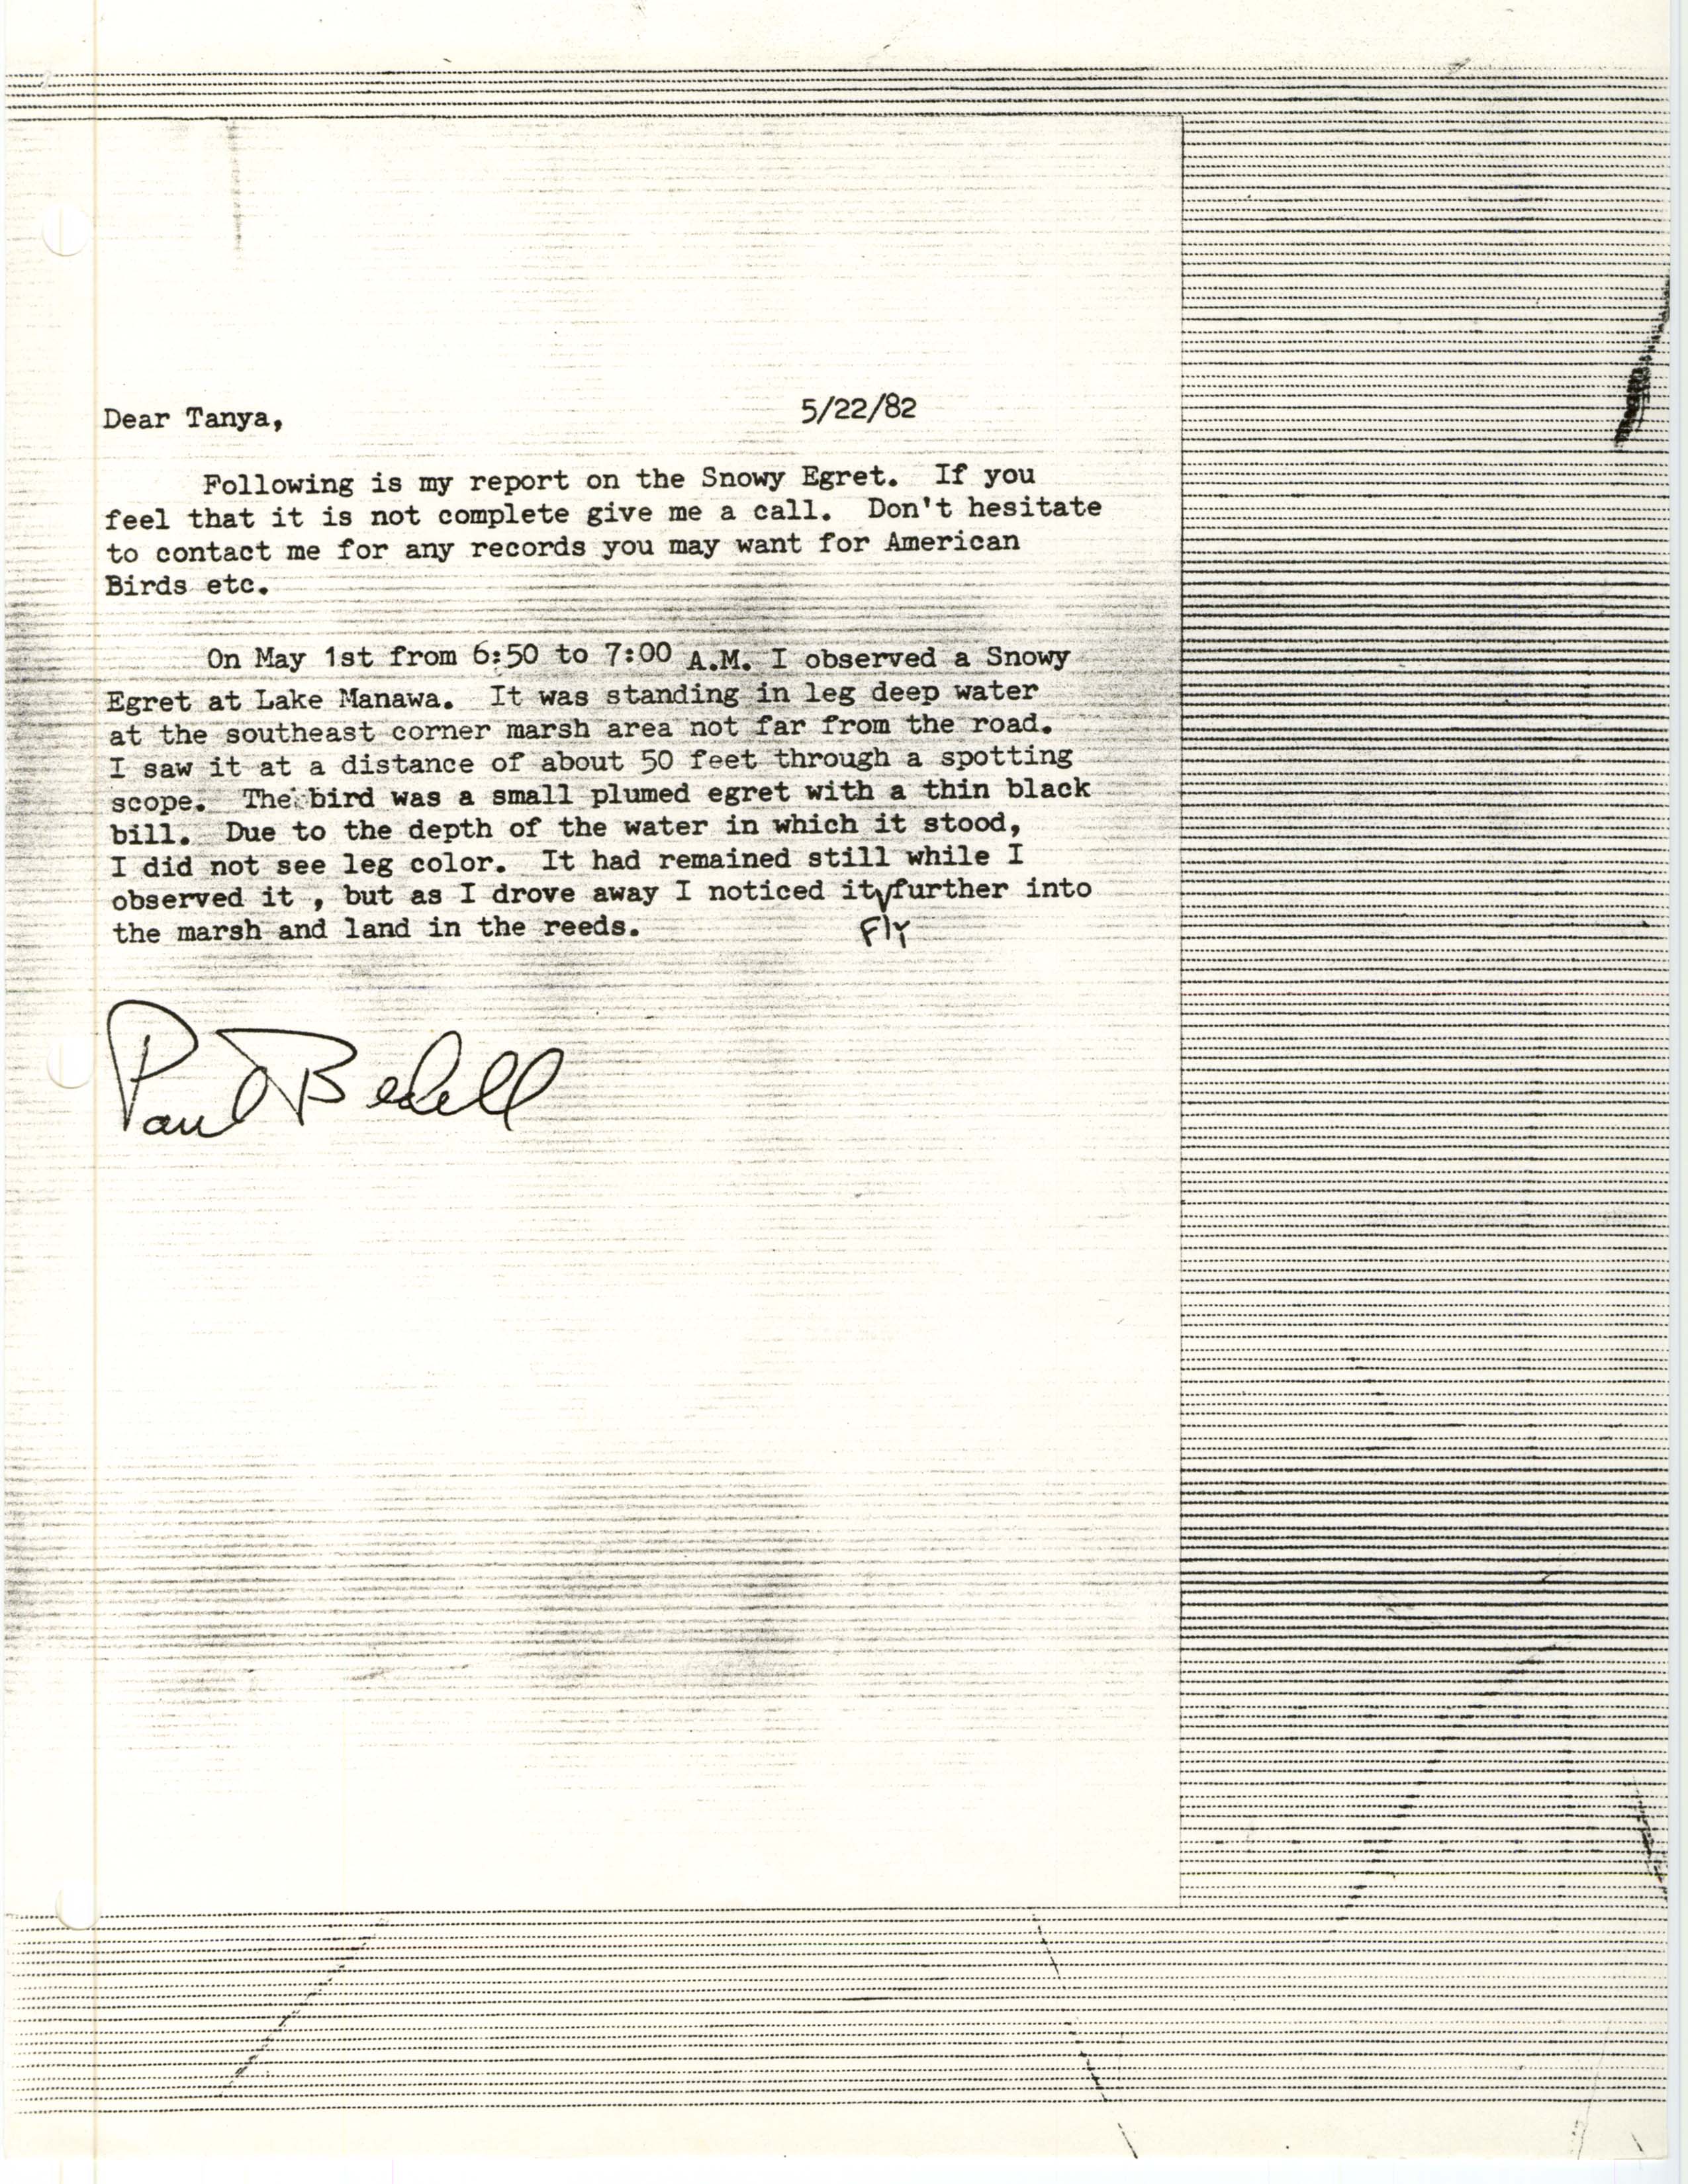 Paul Bedell letter to Tanya Bray regarding a Snowy Egret sighting, May 22, 1982